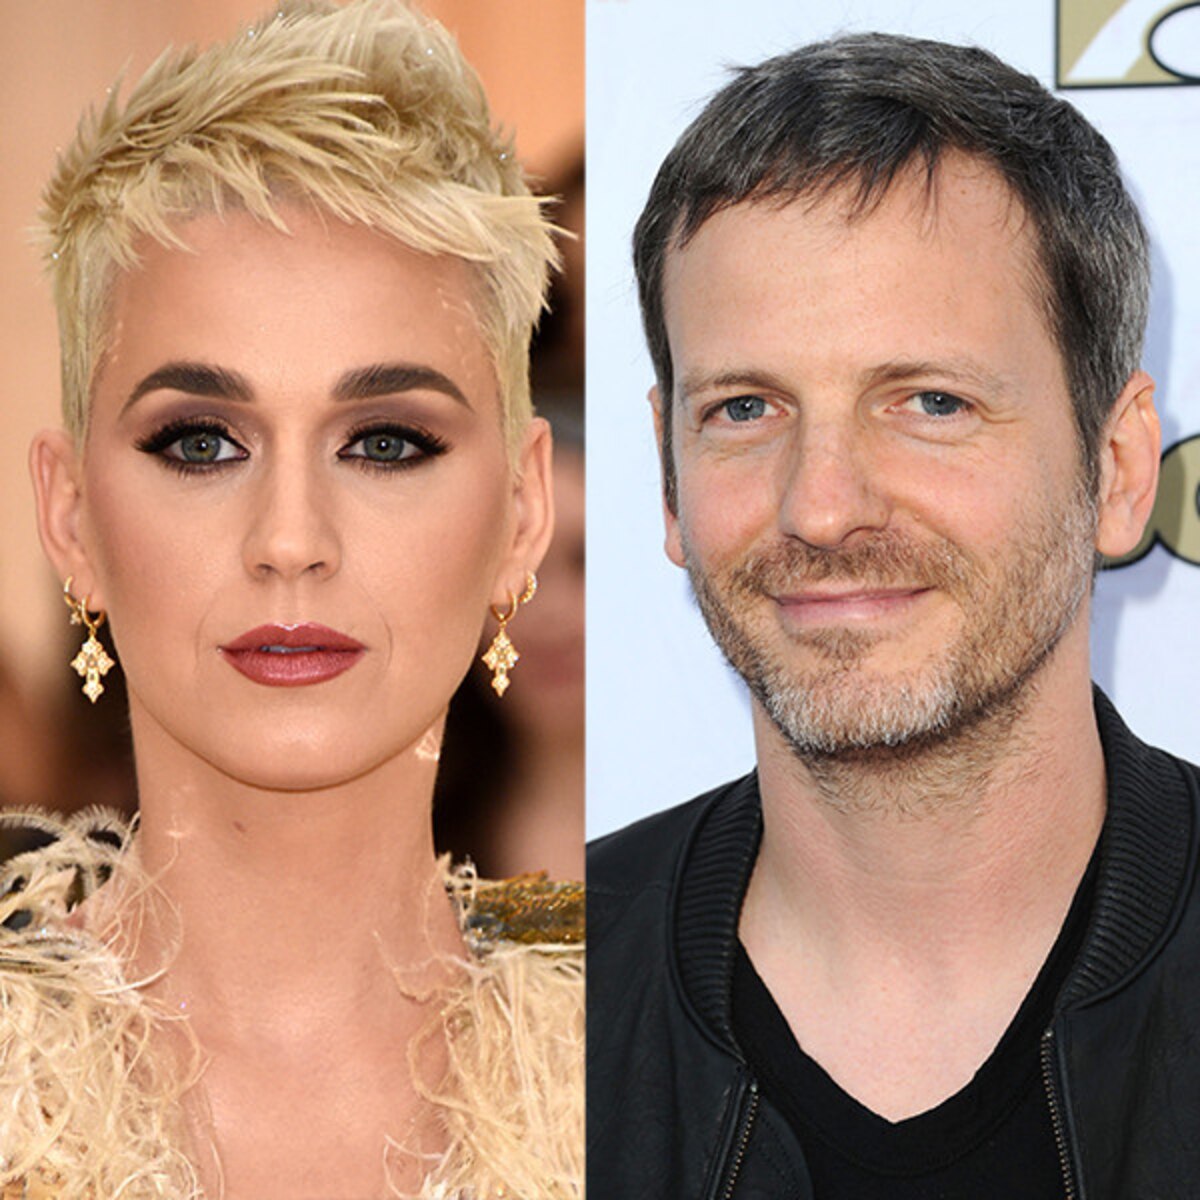 bill ganas recommends katy perry celebrity jihad pic